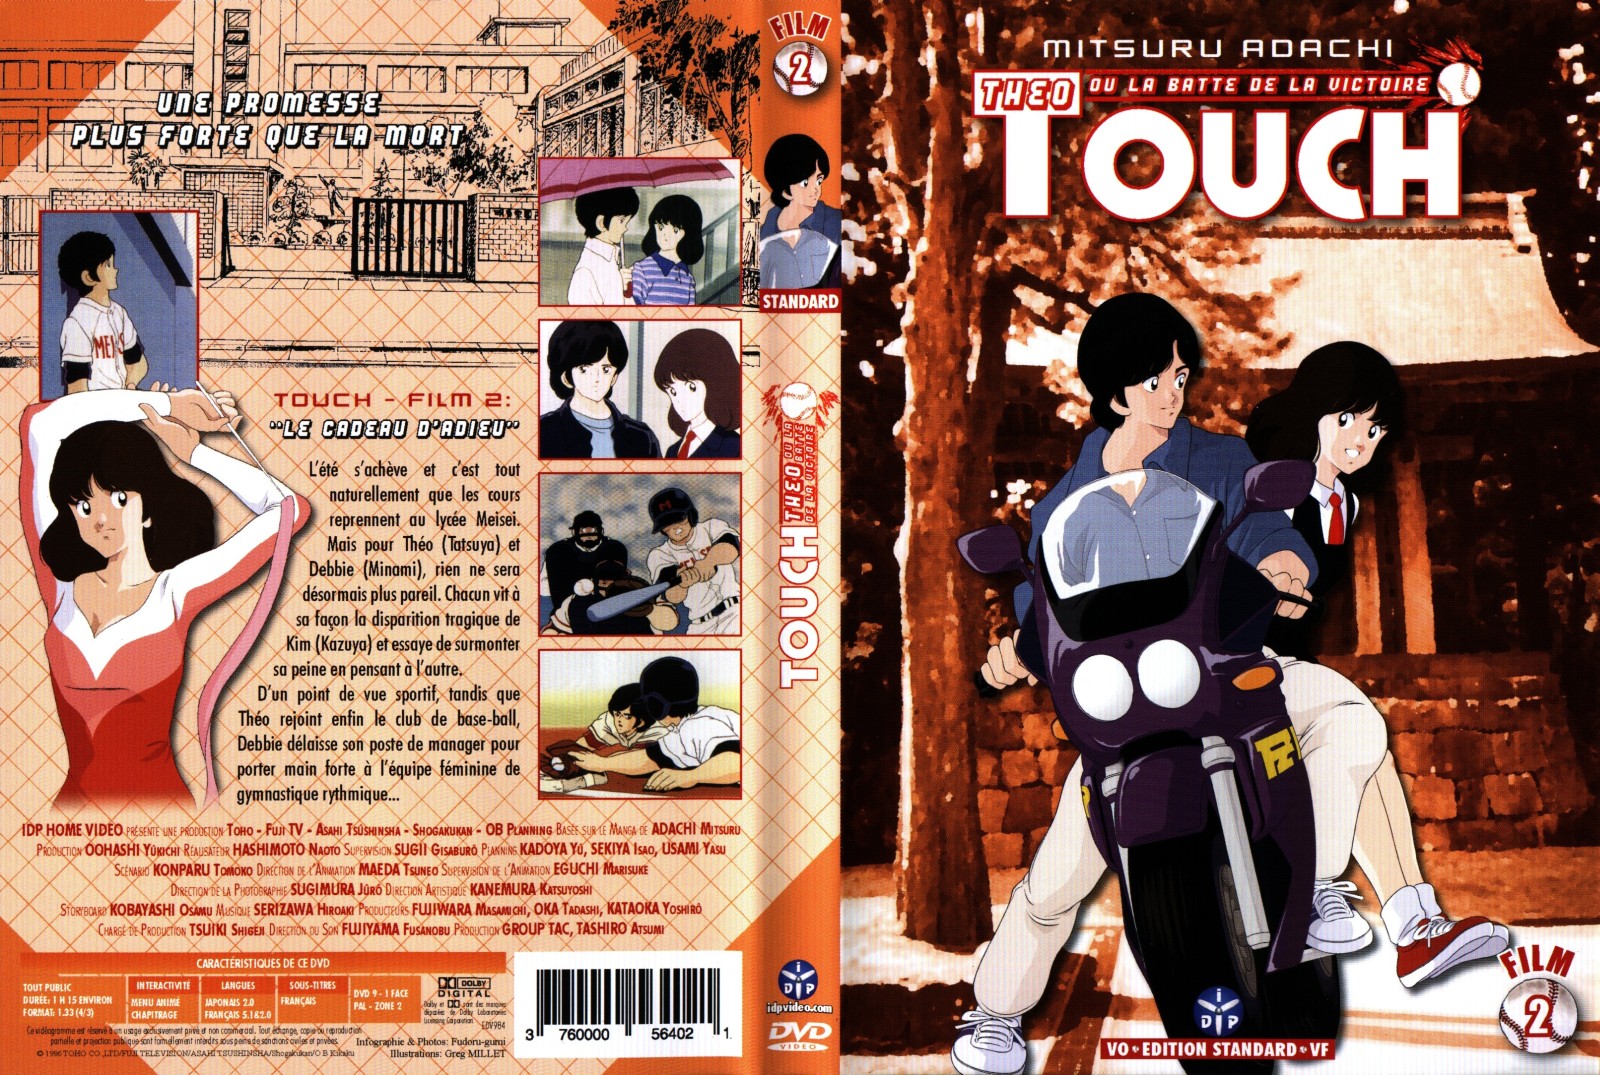 Jaquette DVD Touch film 2